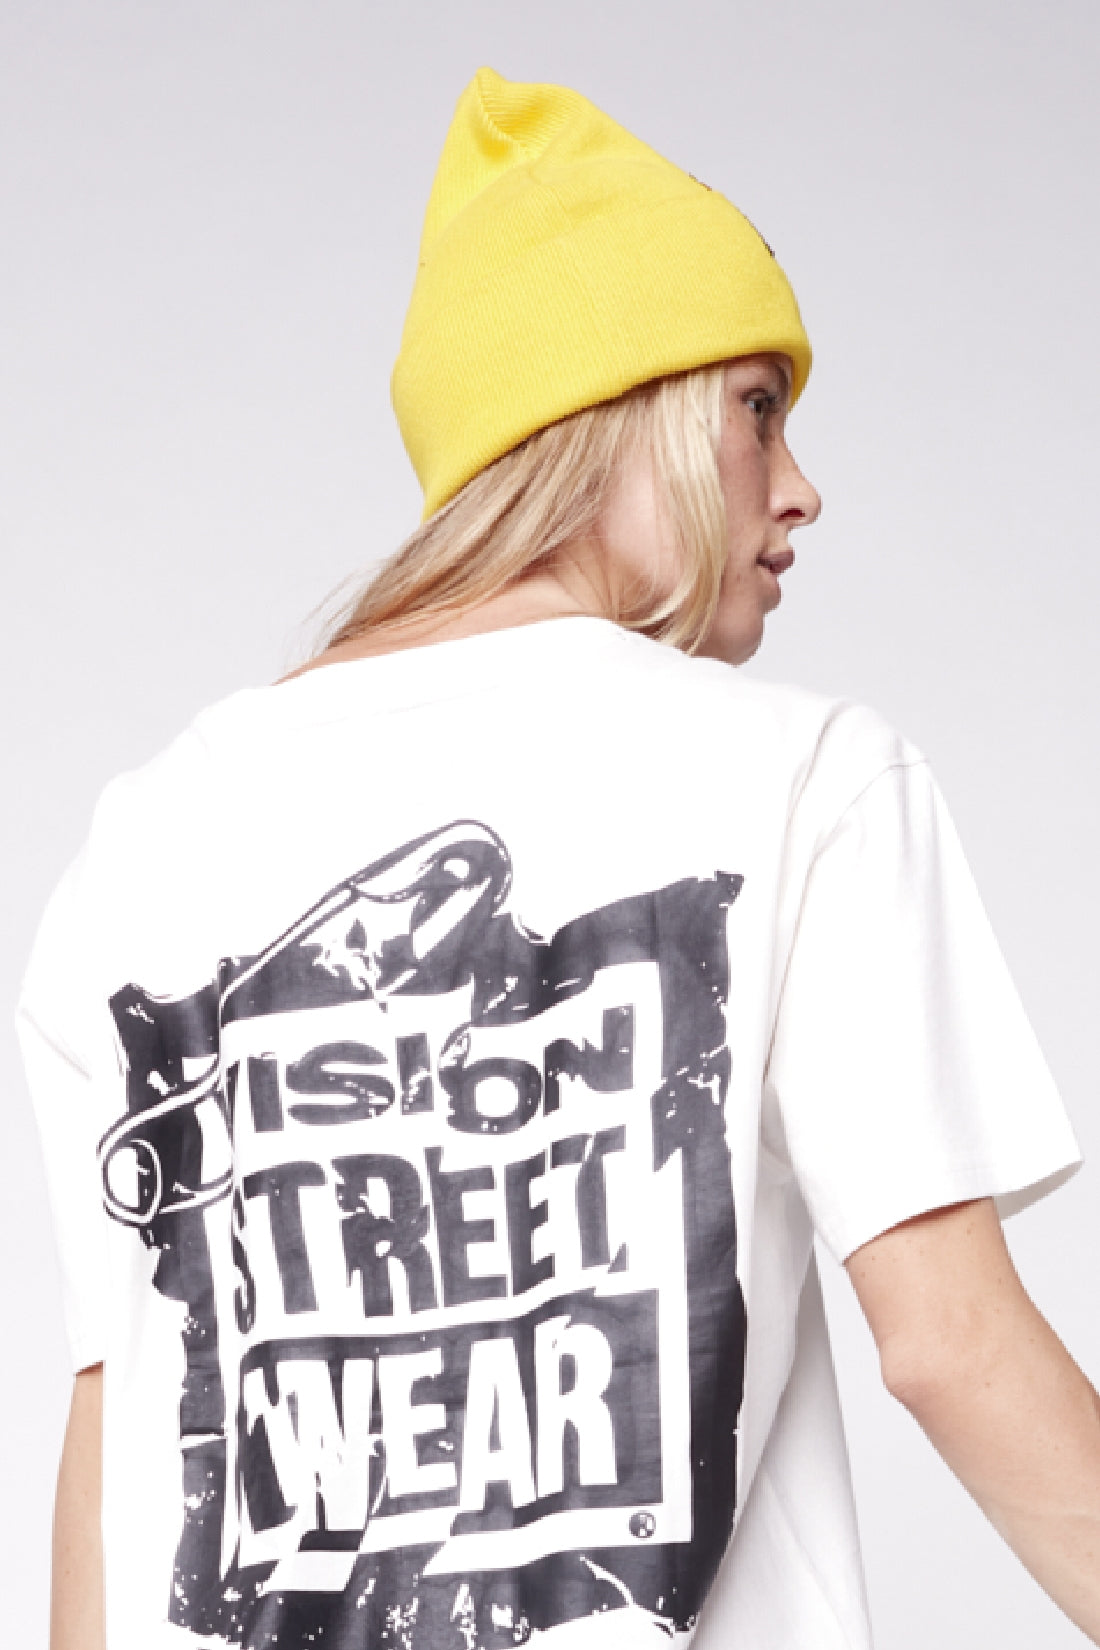 Vision Street Wear Cuffed Skateboard Beanie With Large Logo Patch Yellow